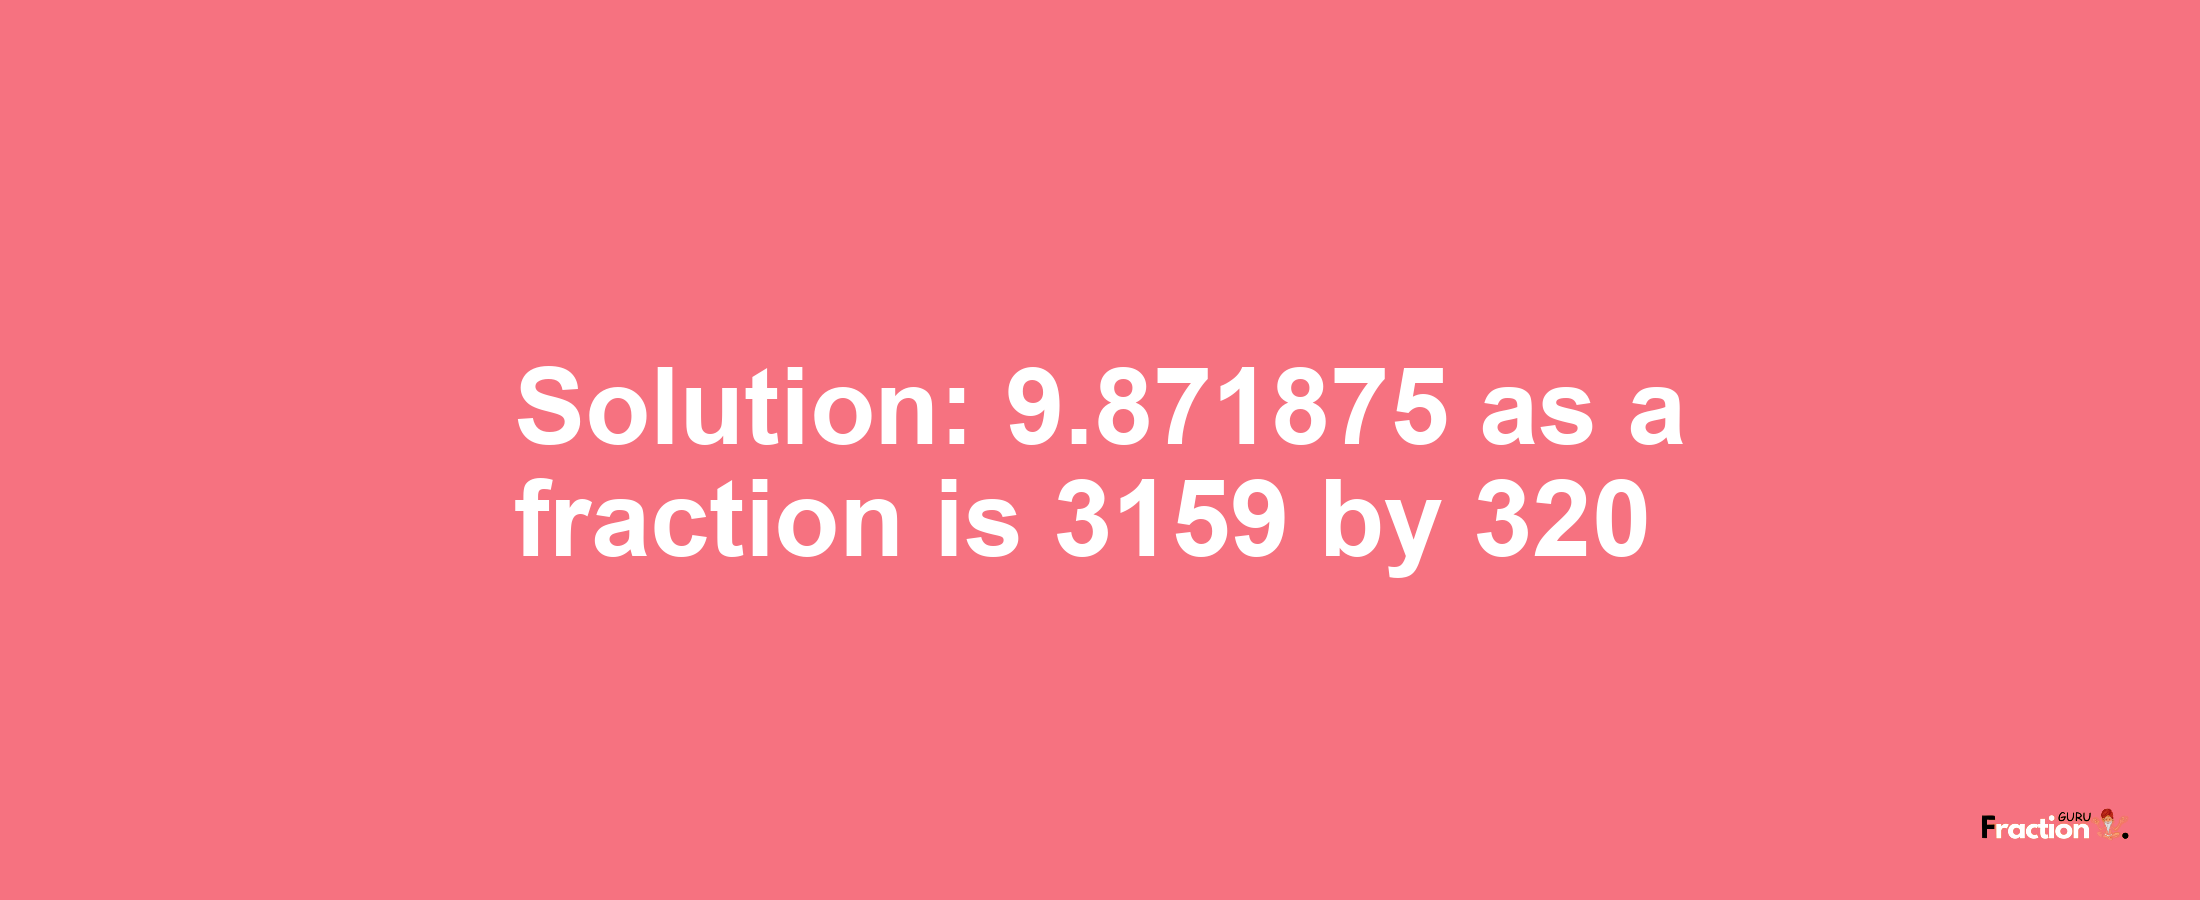 Solution:9.871875 as a fraction is 3159/320